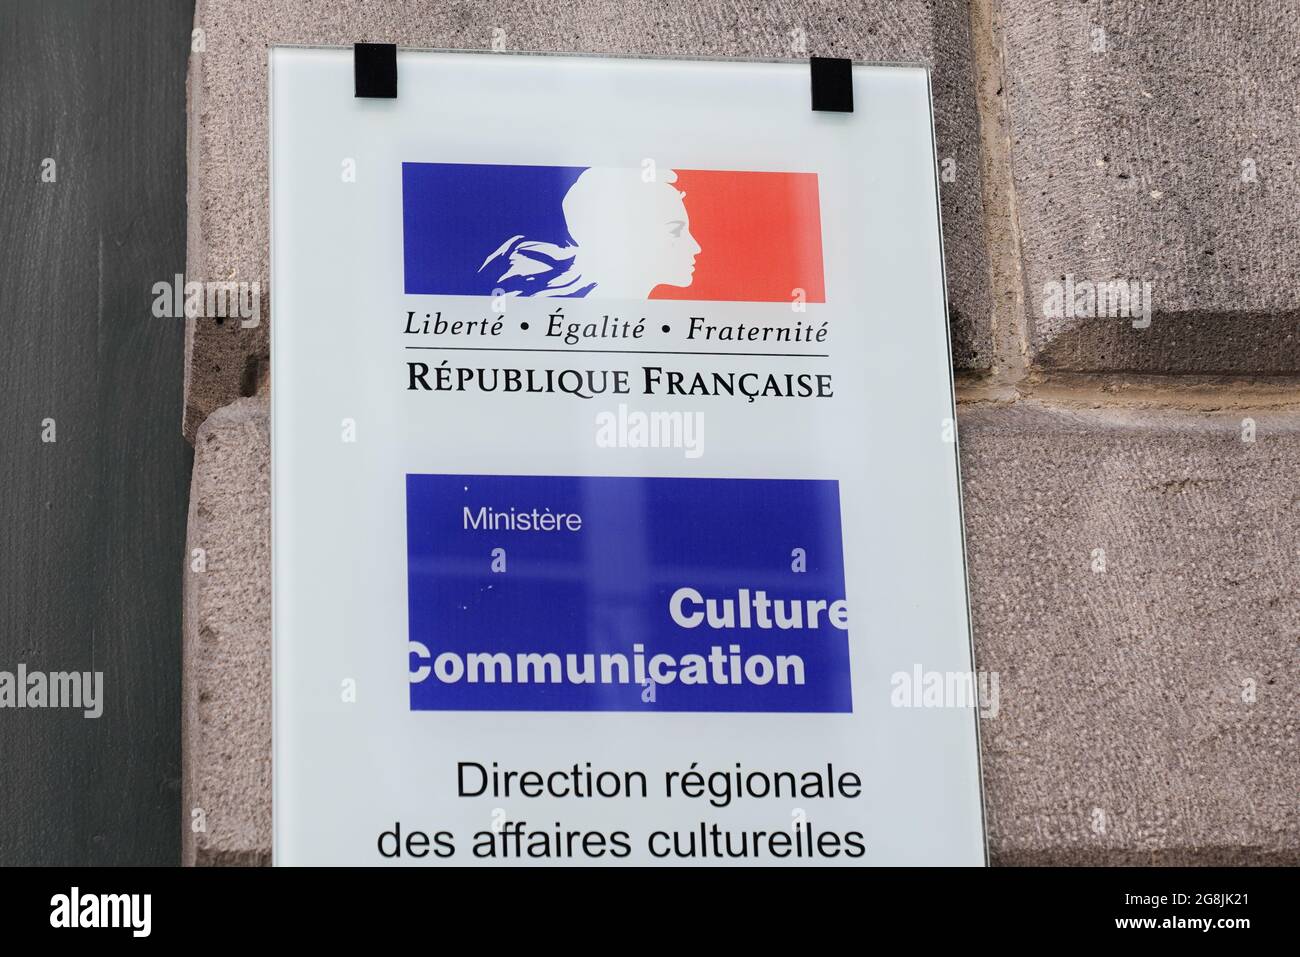 Bordeaux , Aquitaine  France - 12 28 2020 : ministere culture communication and regional directorate of cultural affairs french logo and text sign on Stock Photo